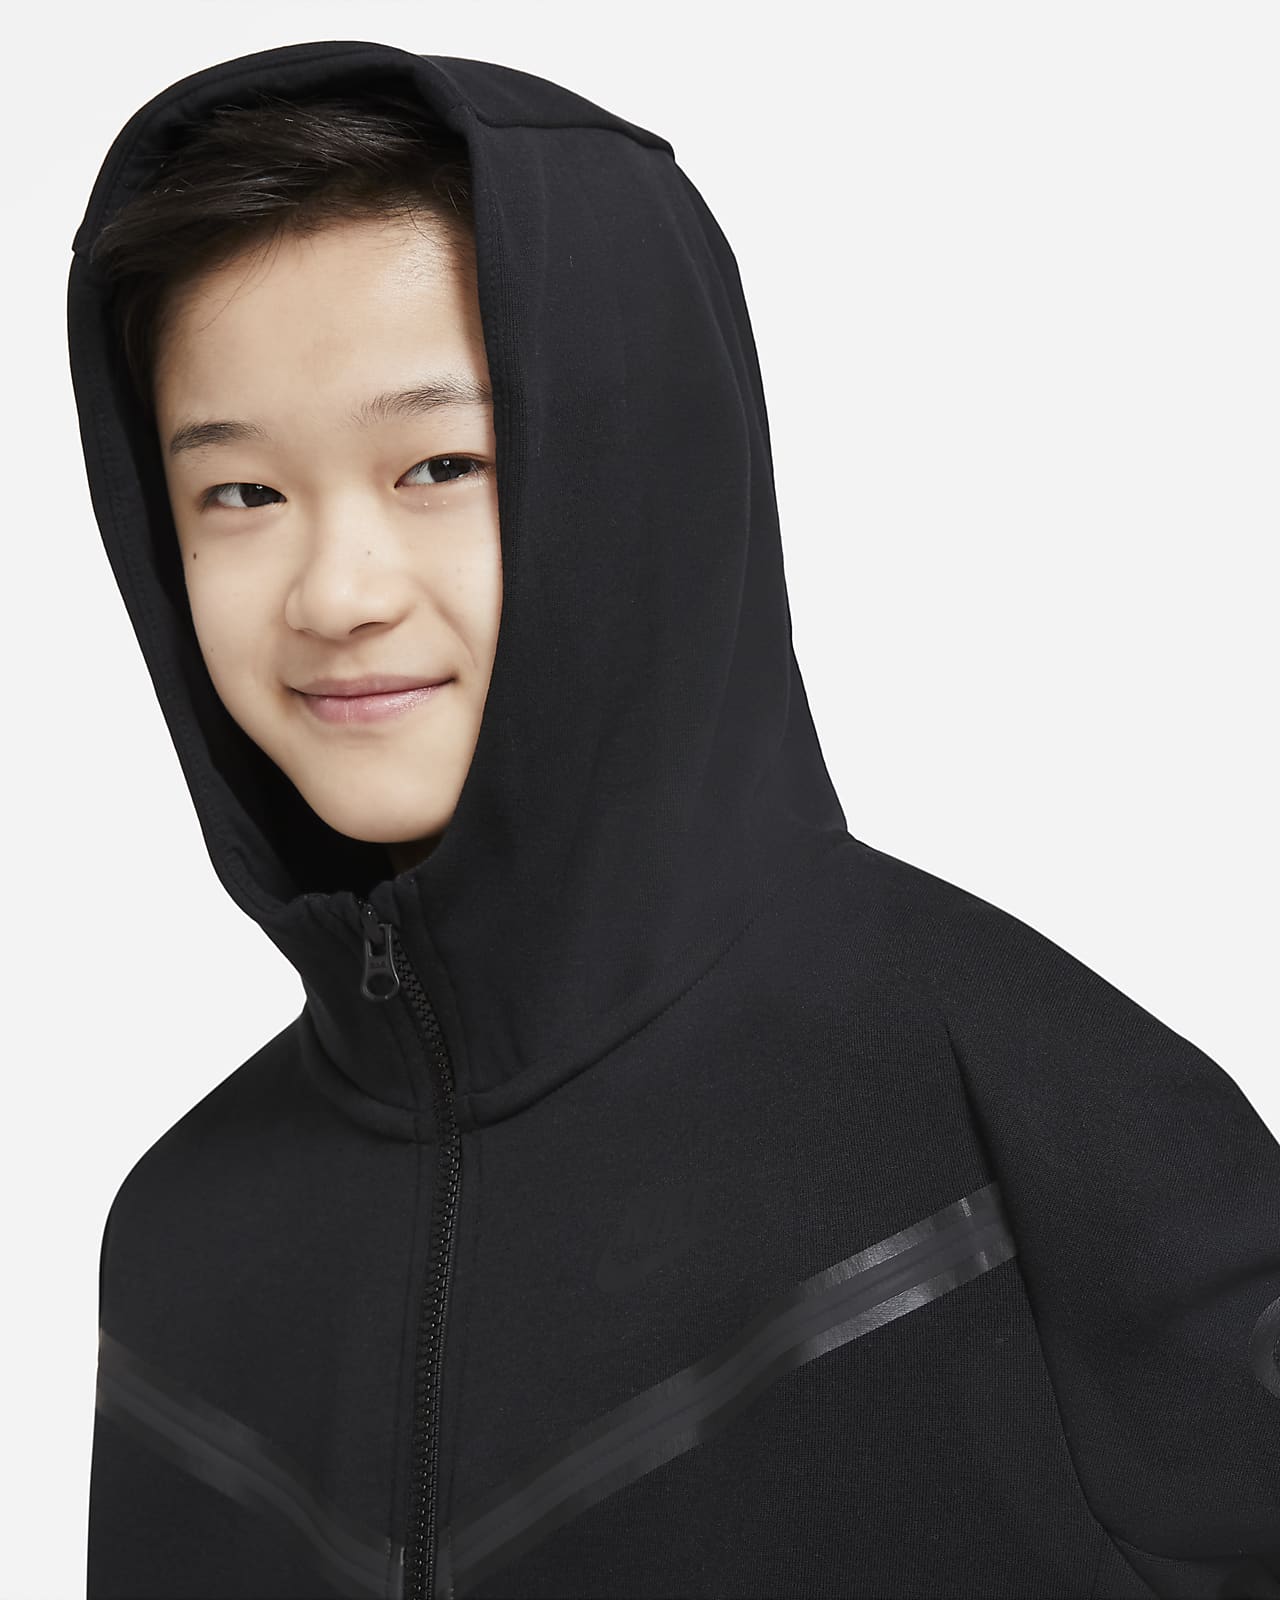 XL 14 Boys Warm Zip up Hoodie with Body and Hood Lining 